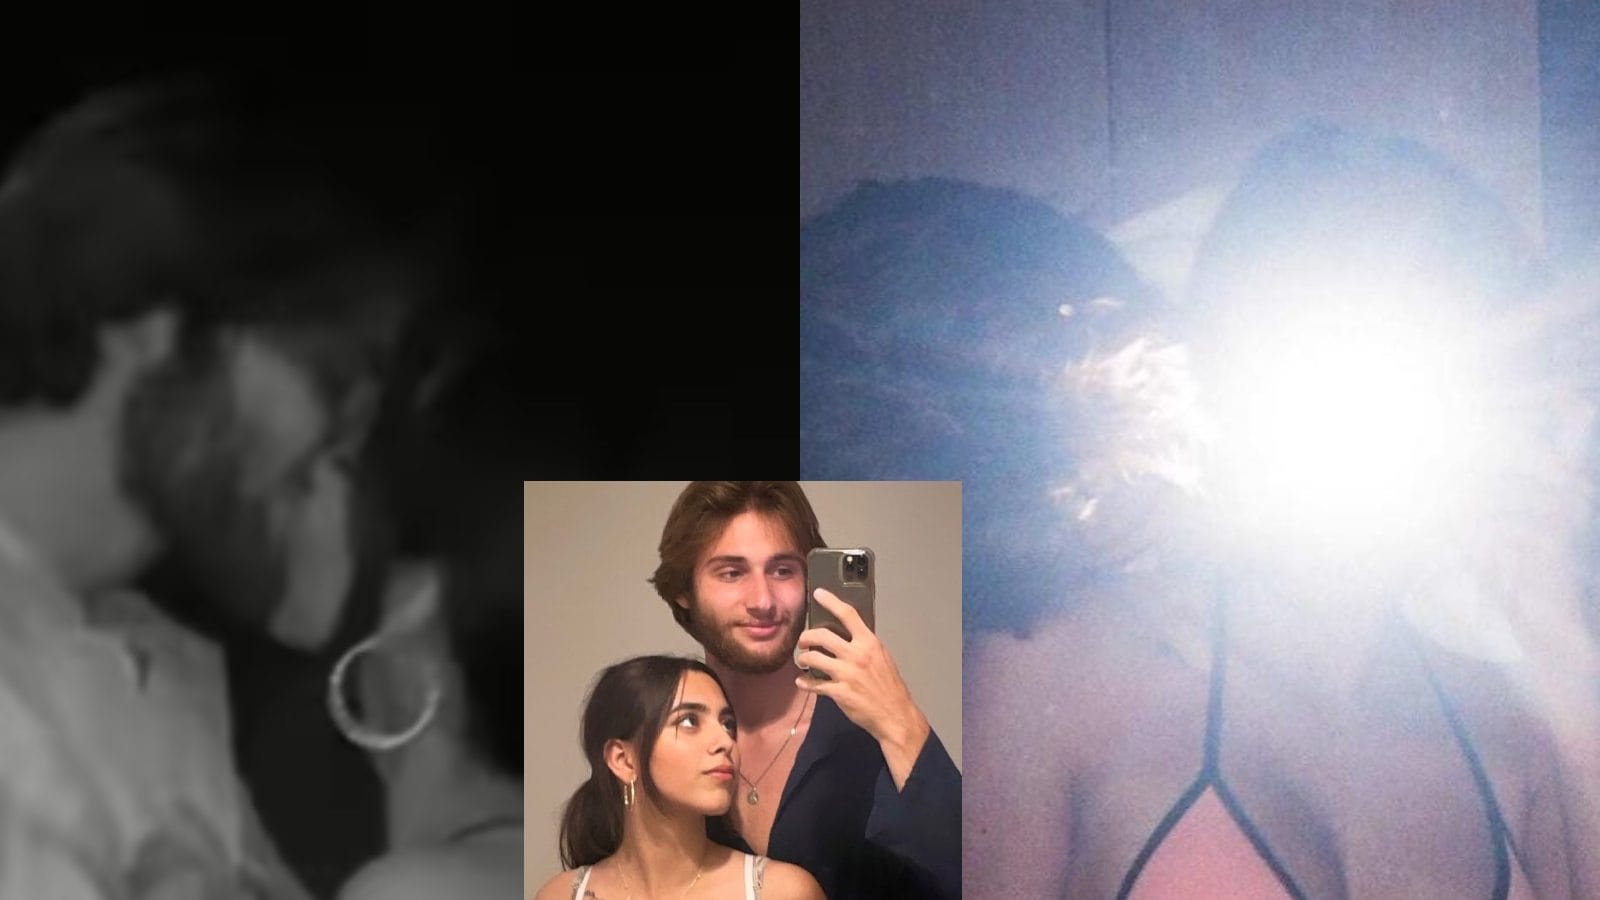 Anurag Kashyap Daughter Aaliyah Kashyap Shares Intimate Photos With Boyfriend on His Birthday